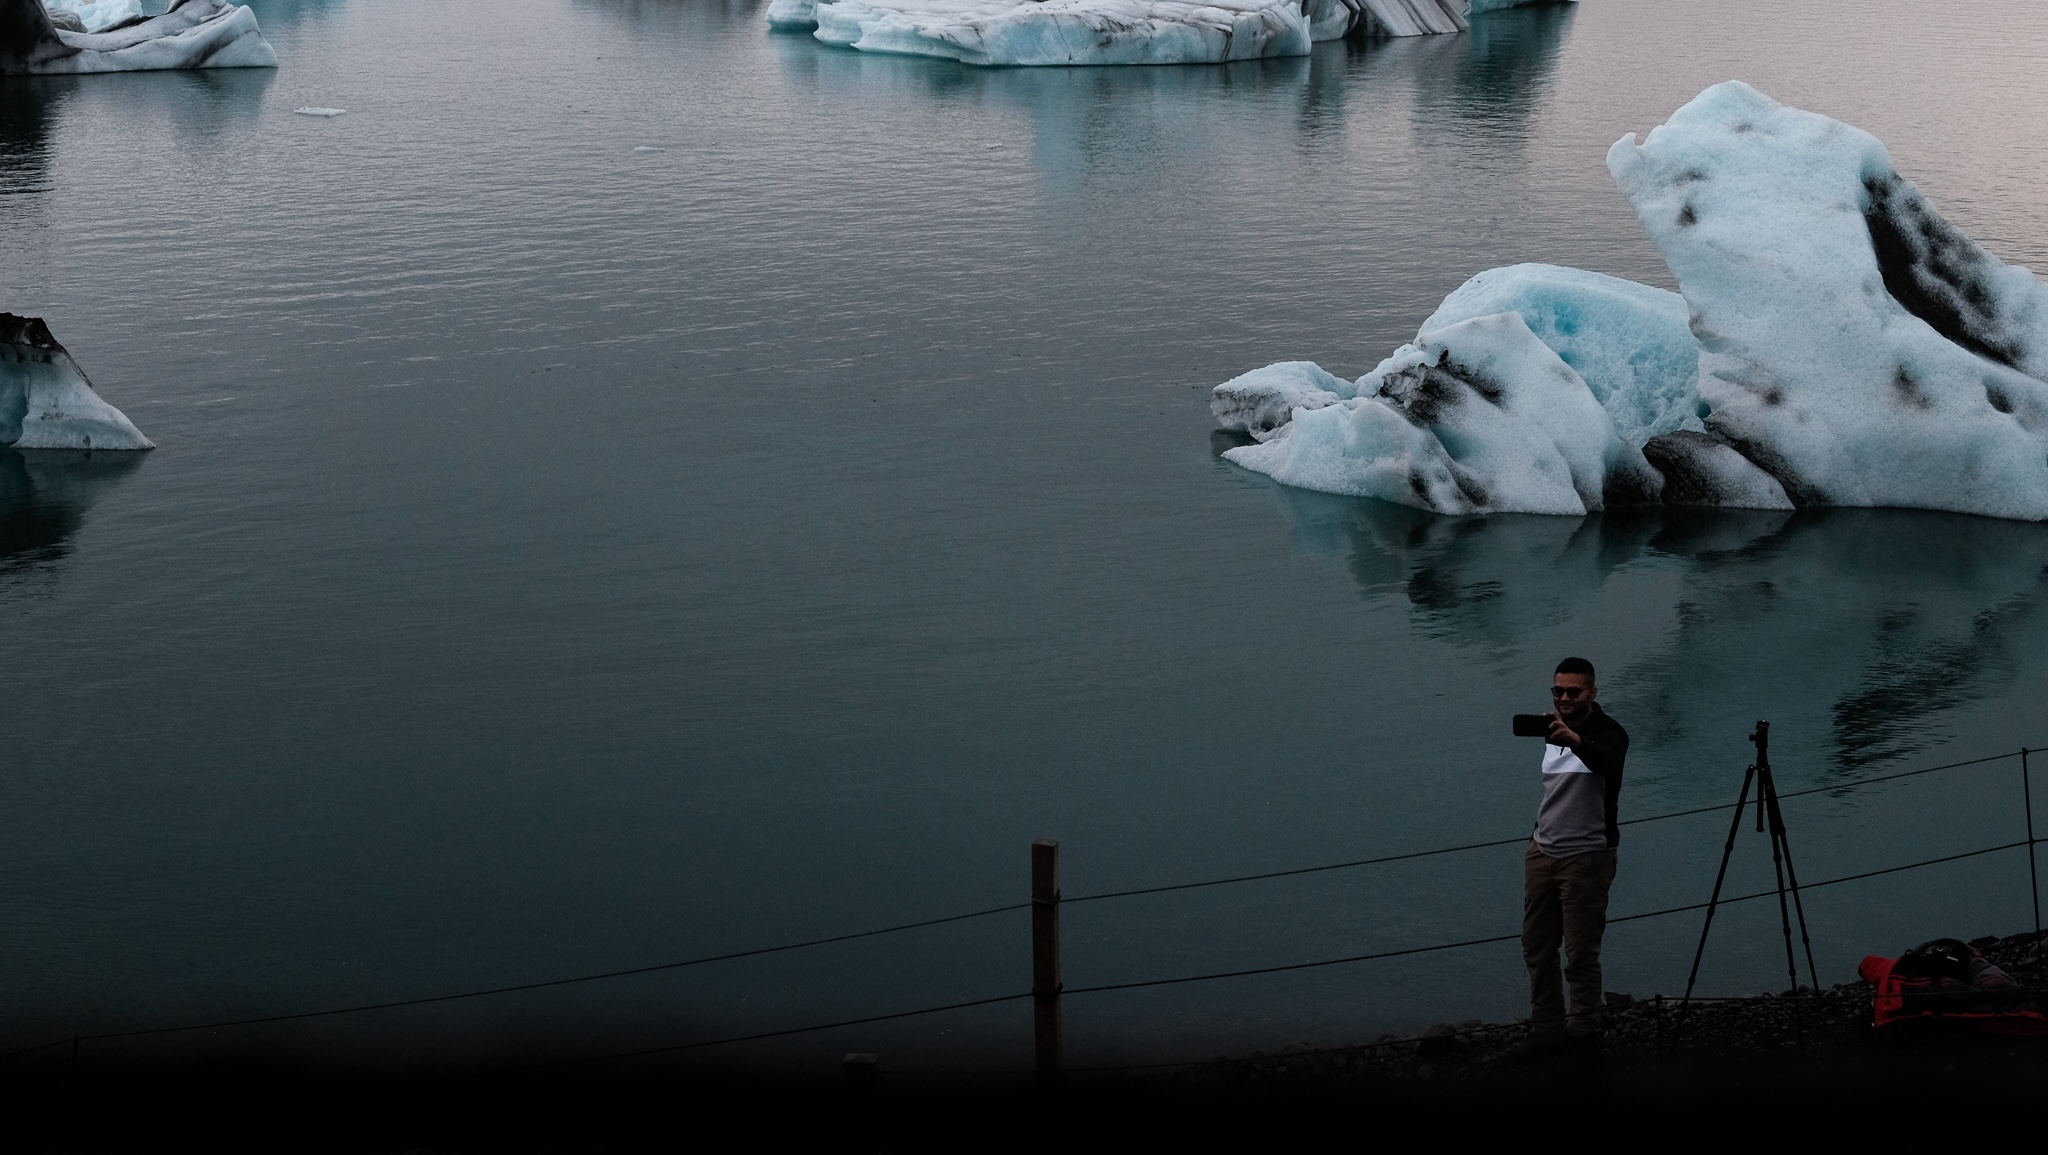 A man standing alone, takes a selfie against the glaciel lake, smiling and capturing the moment for later